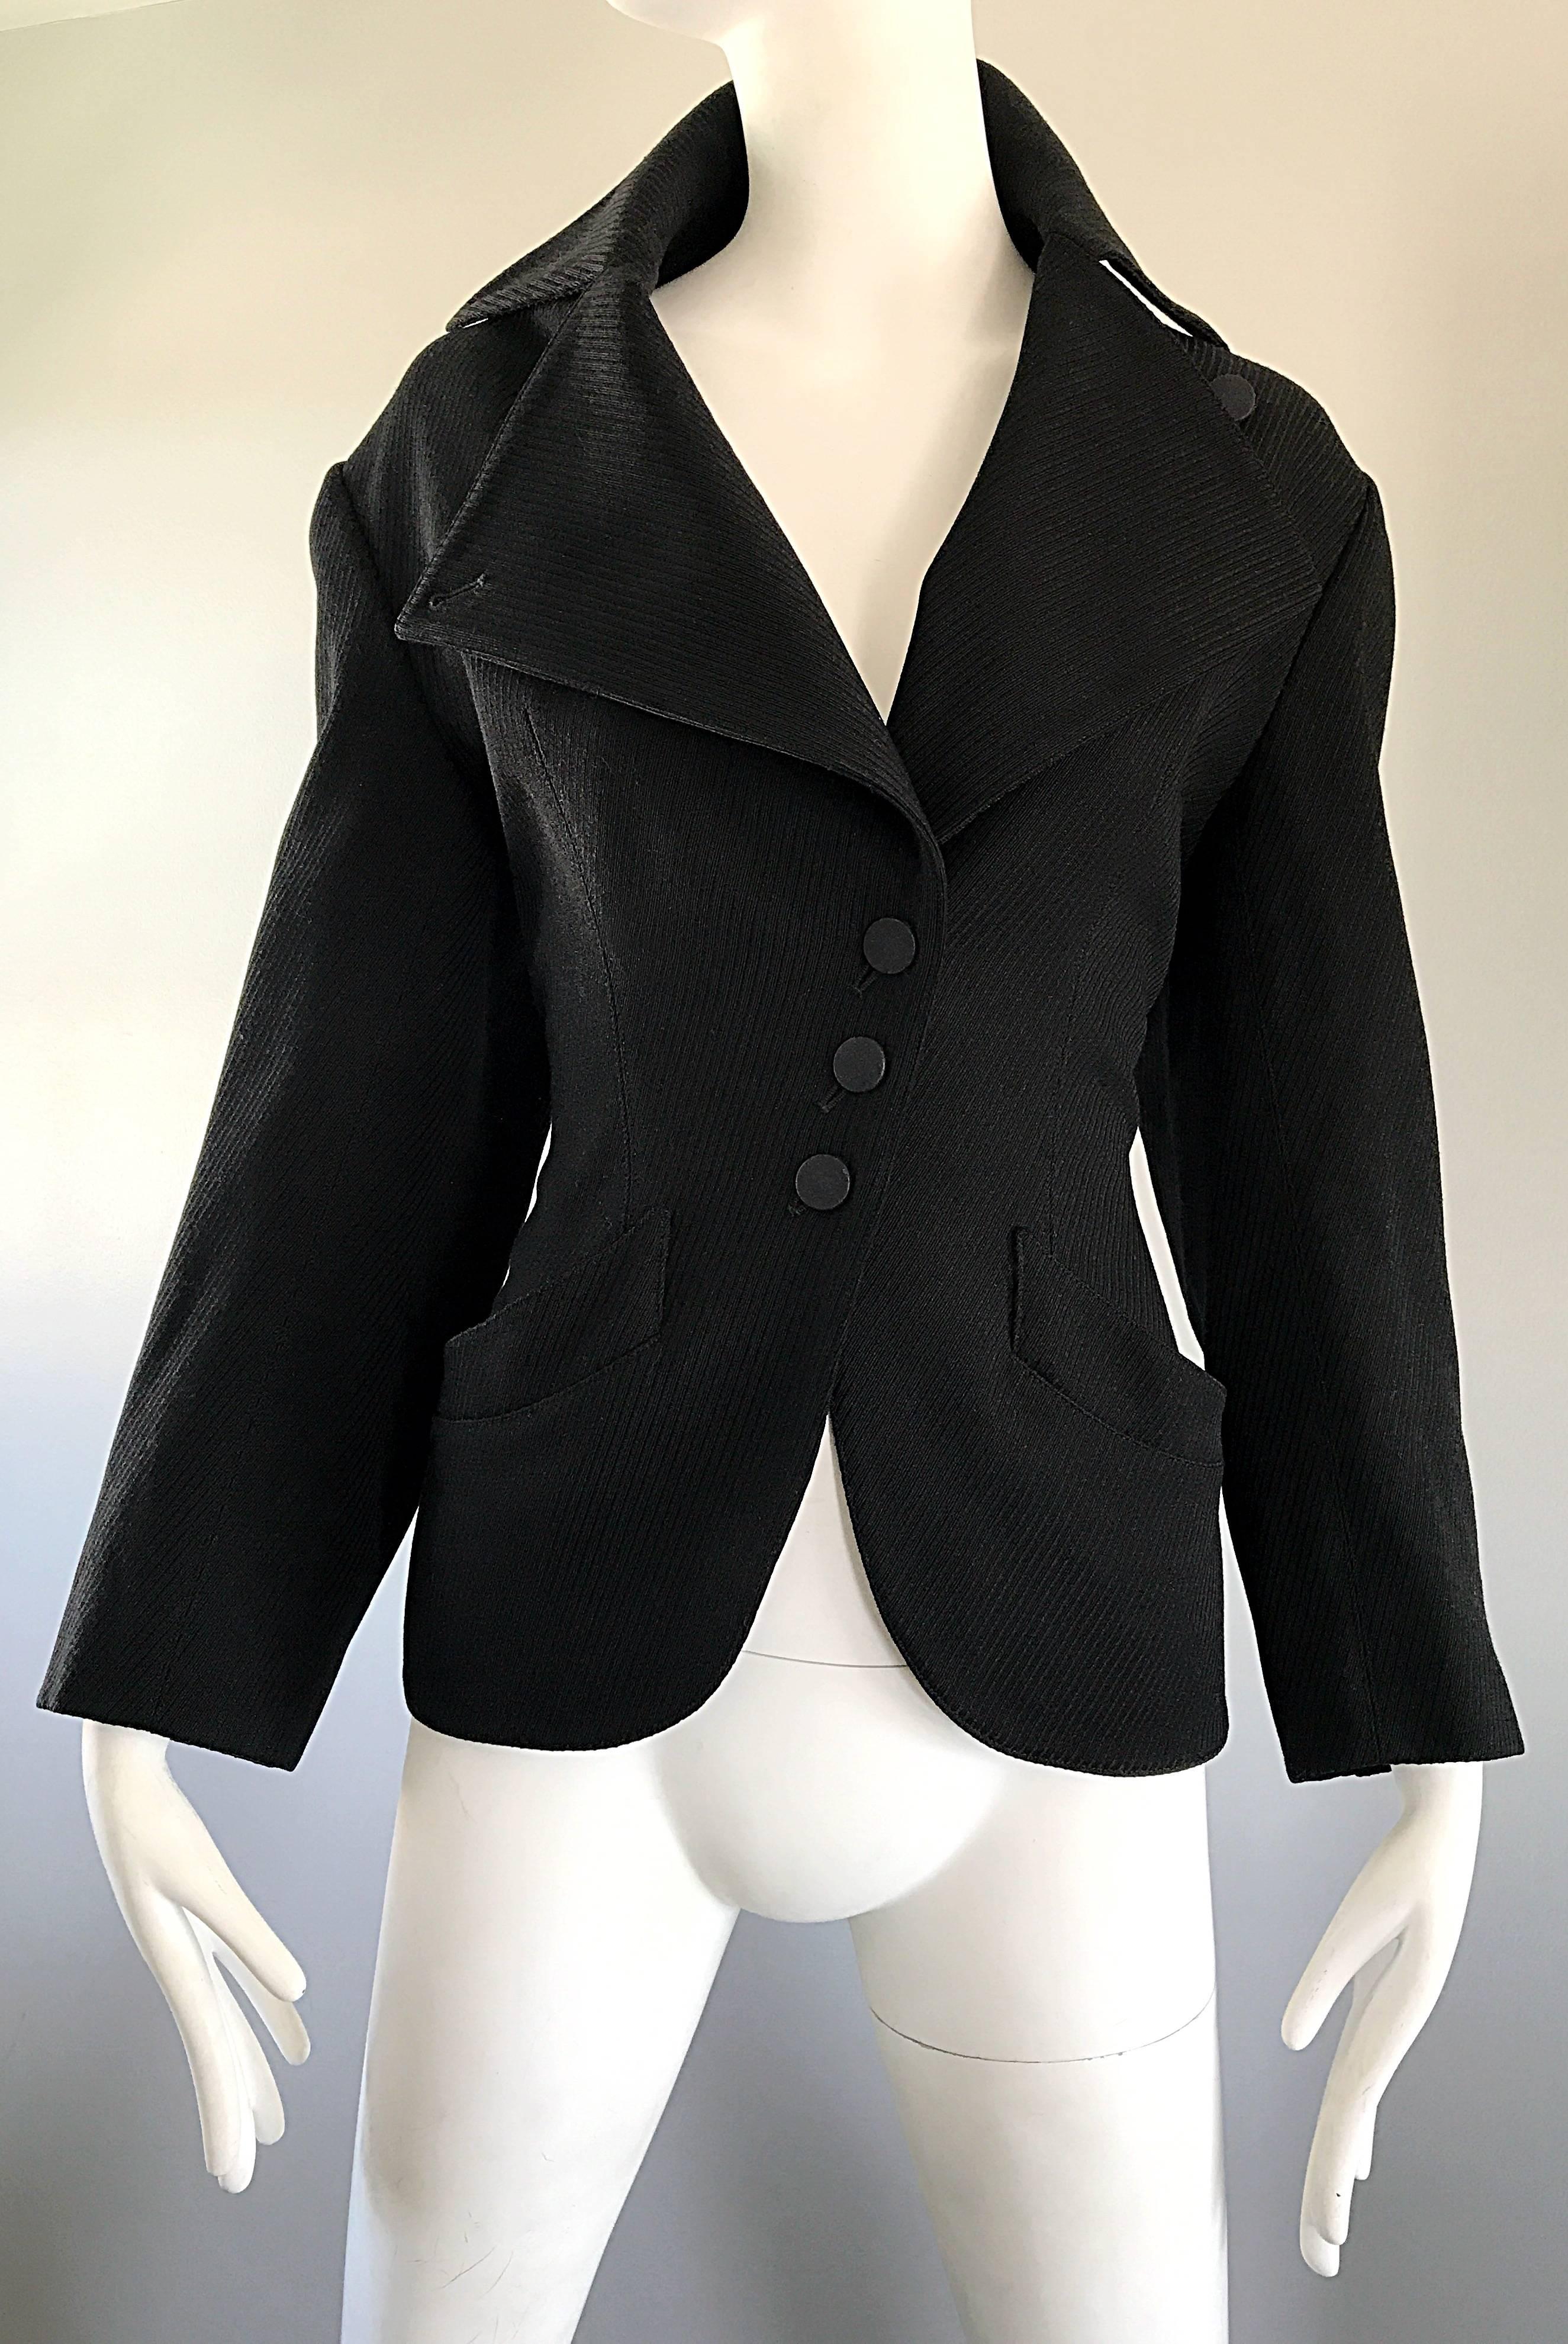 Black Rare Vintage Alaia 1980s Musuem Held Avant Garde Wasp Waist 80s Fitted Jacket For Sale